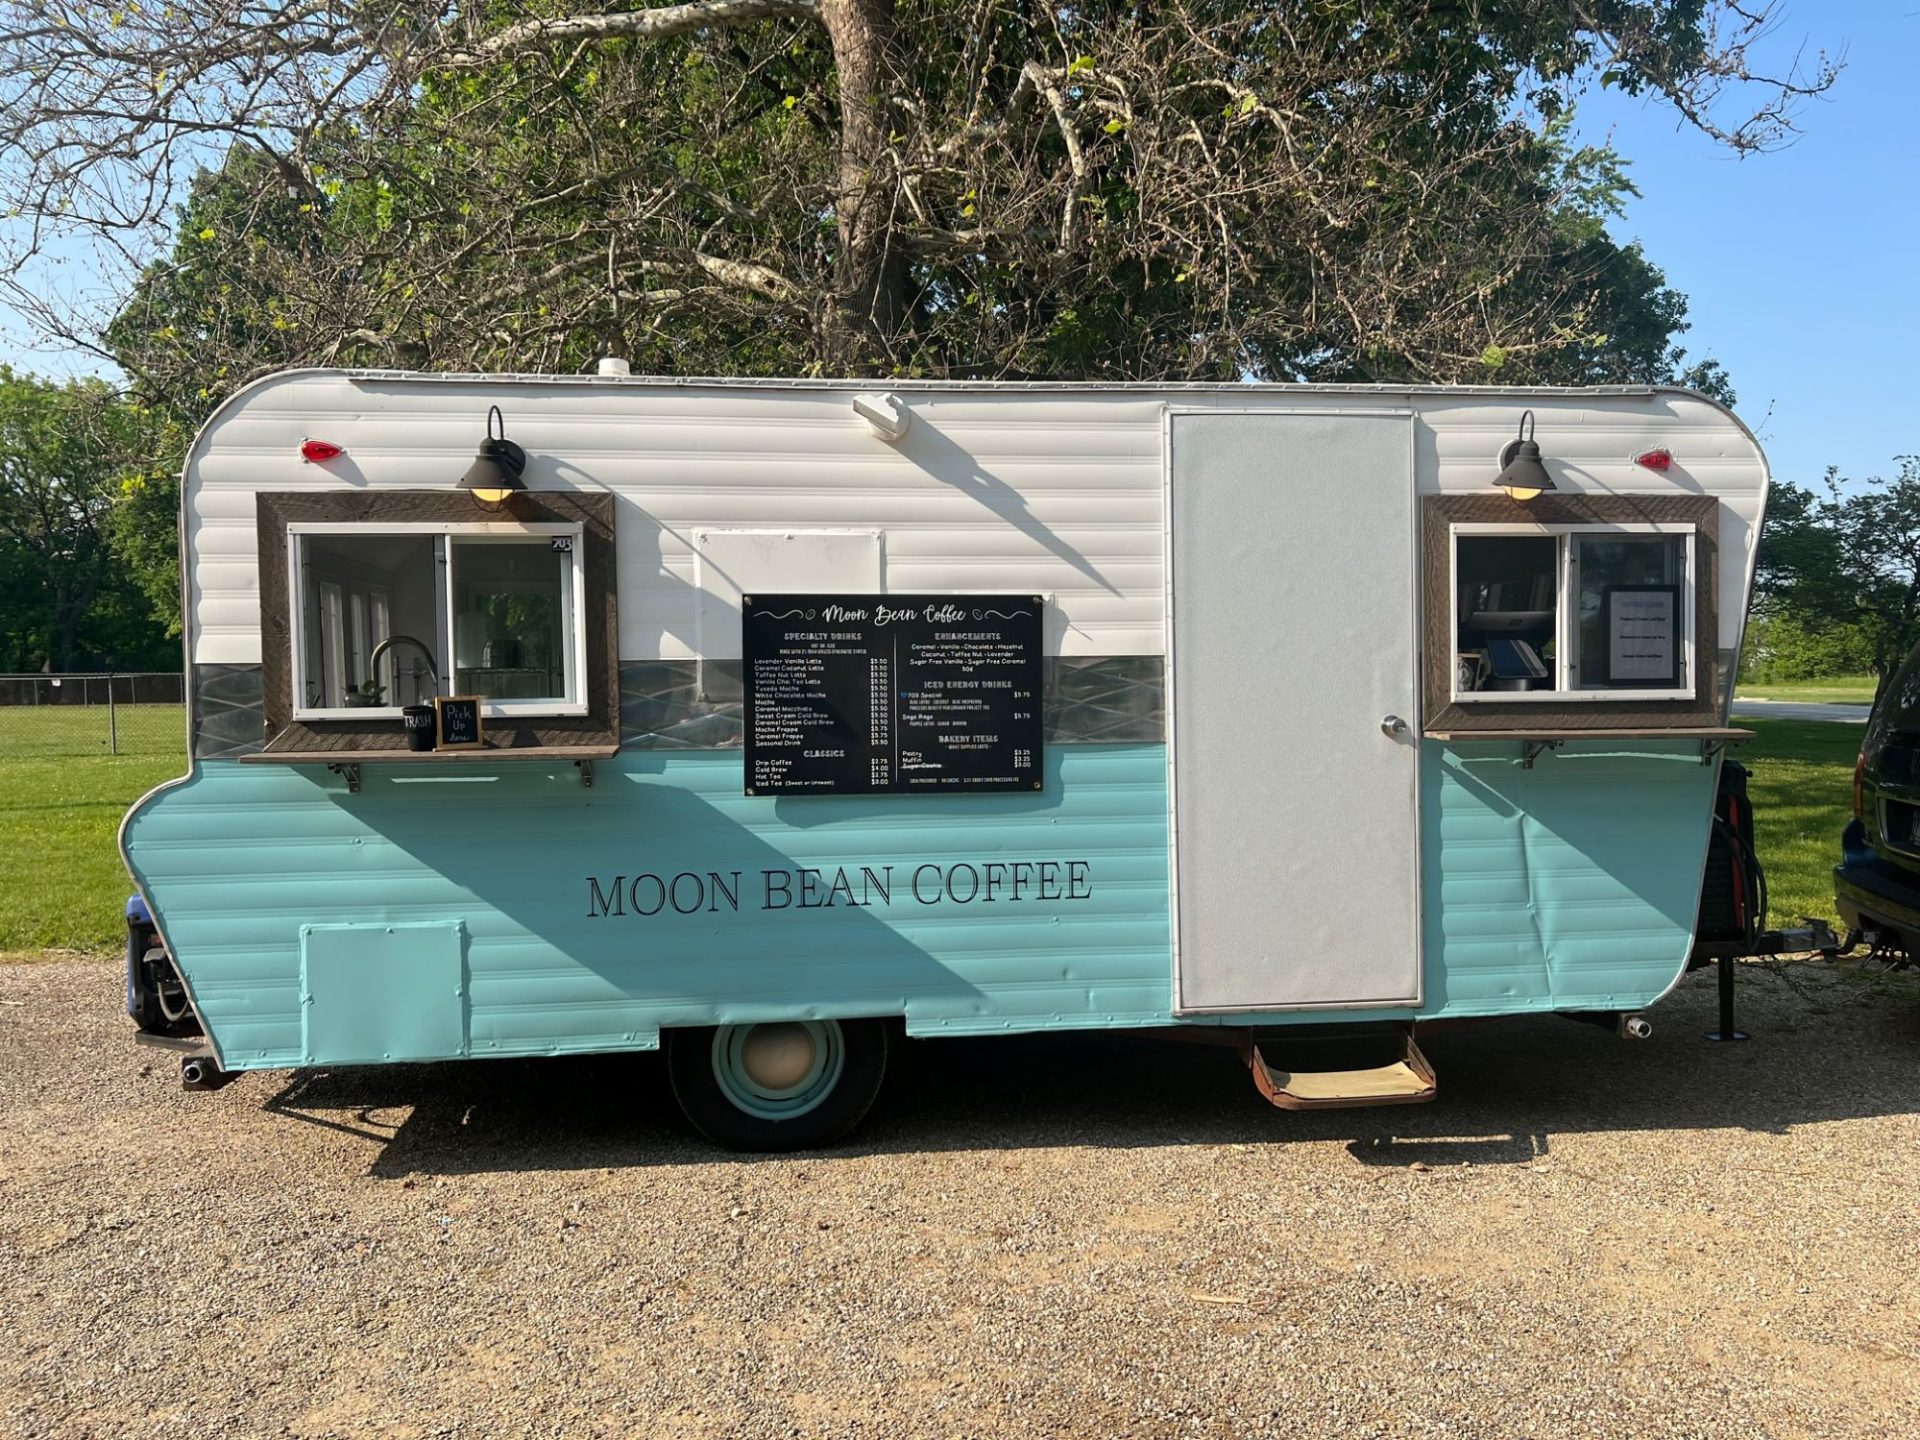 A camping style trailer that is painted white on the top and turquoise on the bottom. It says Moon Bean Coffee in black lettering. There is a door and two windows on the side, as well as a black menu board.